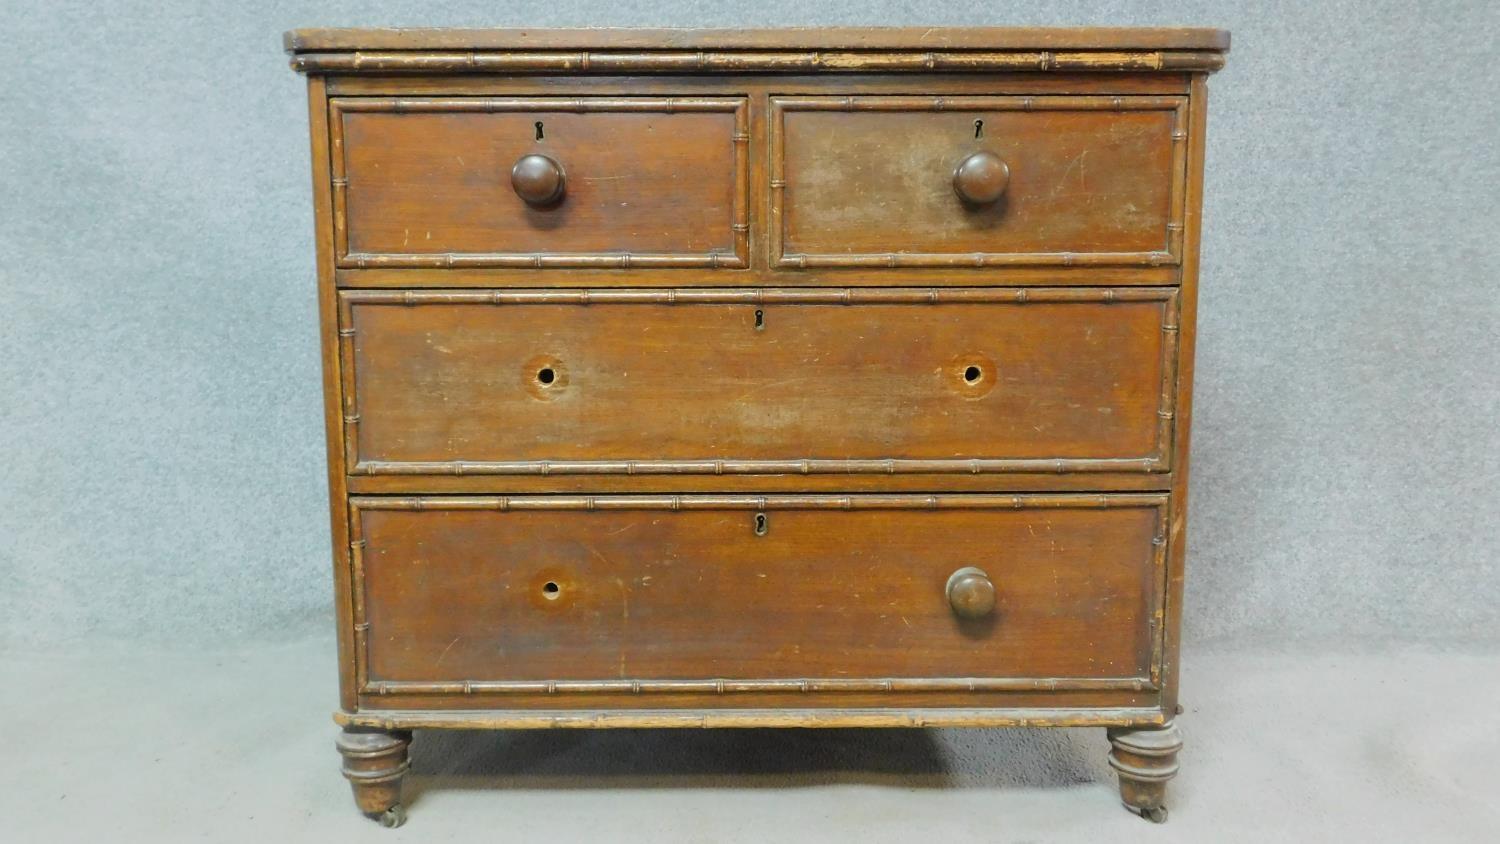 An early 19th century pitch pine chest of drawers with faux bamboo mouldings raised on squat